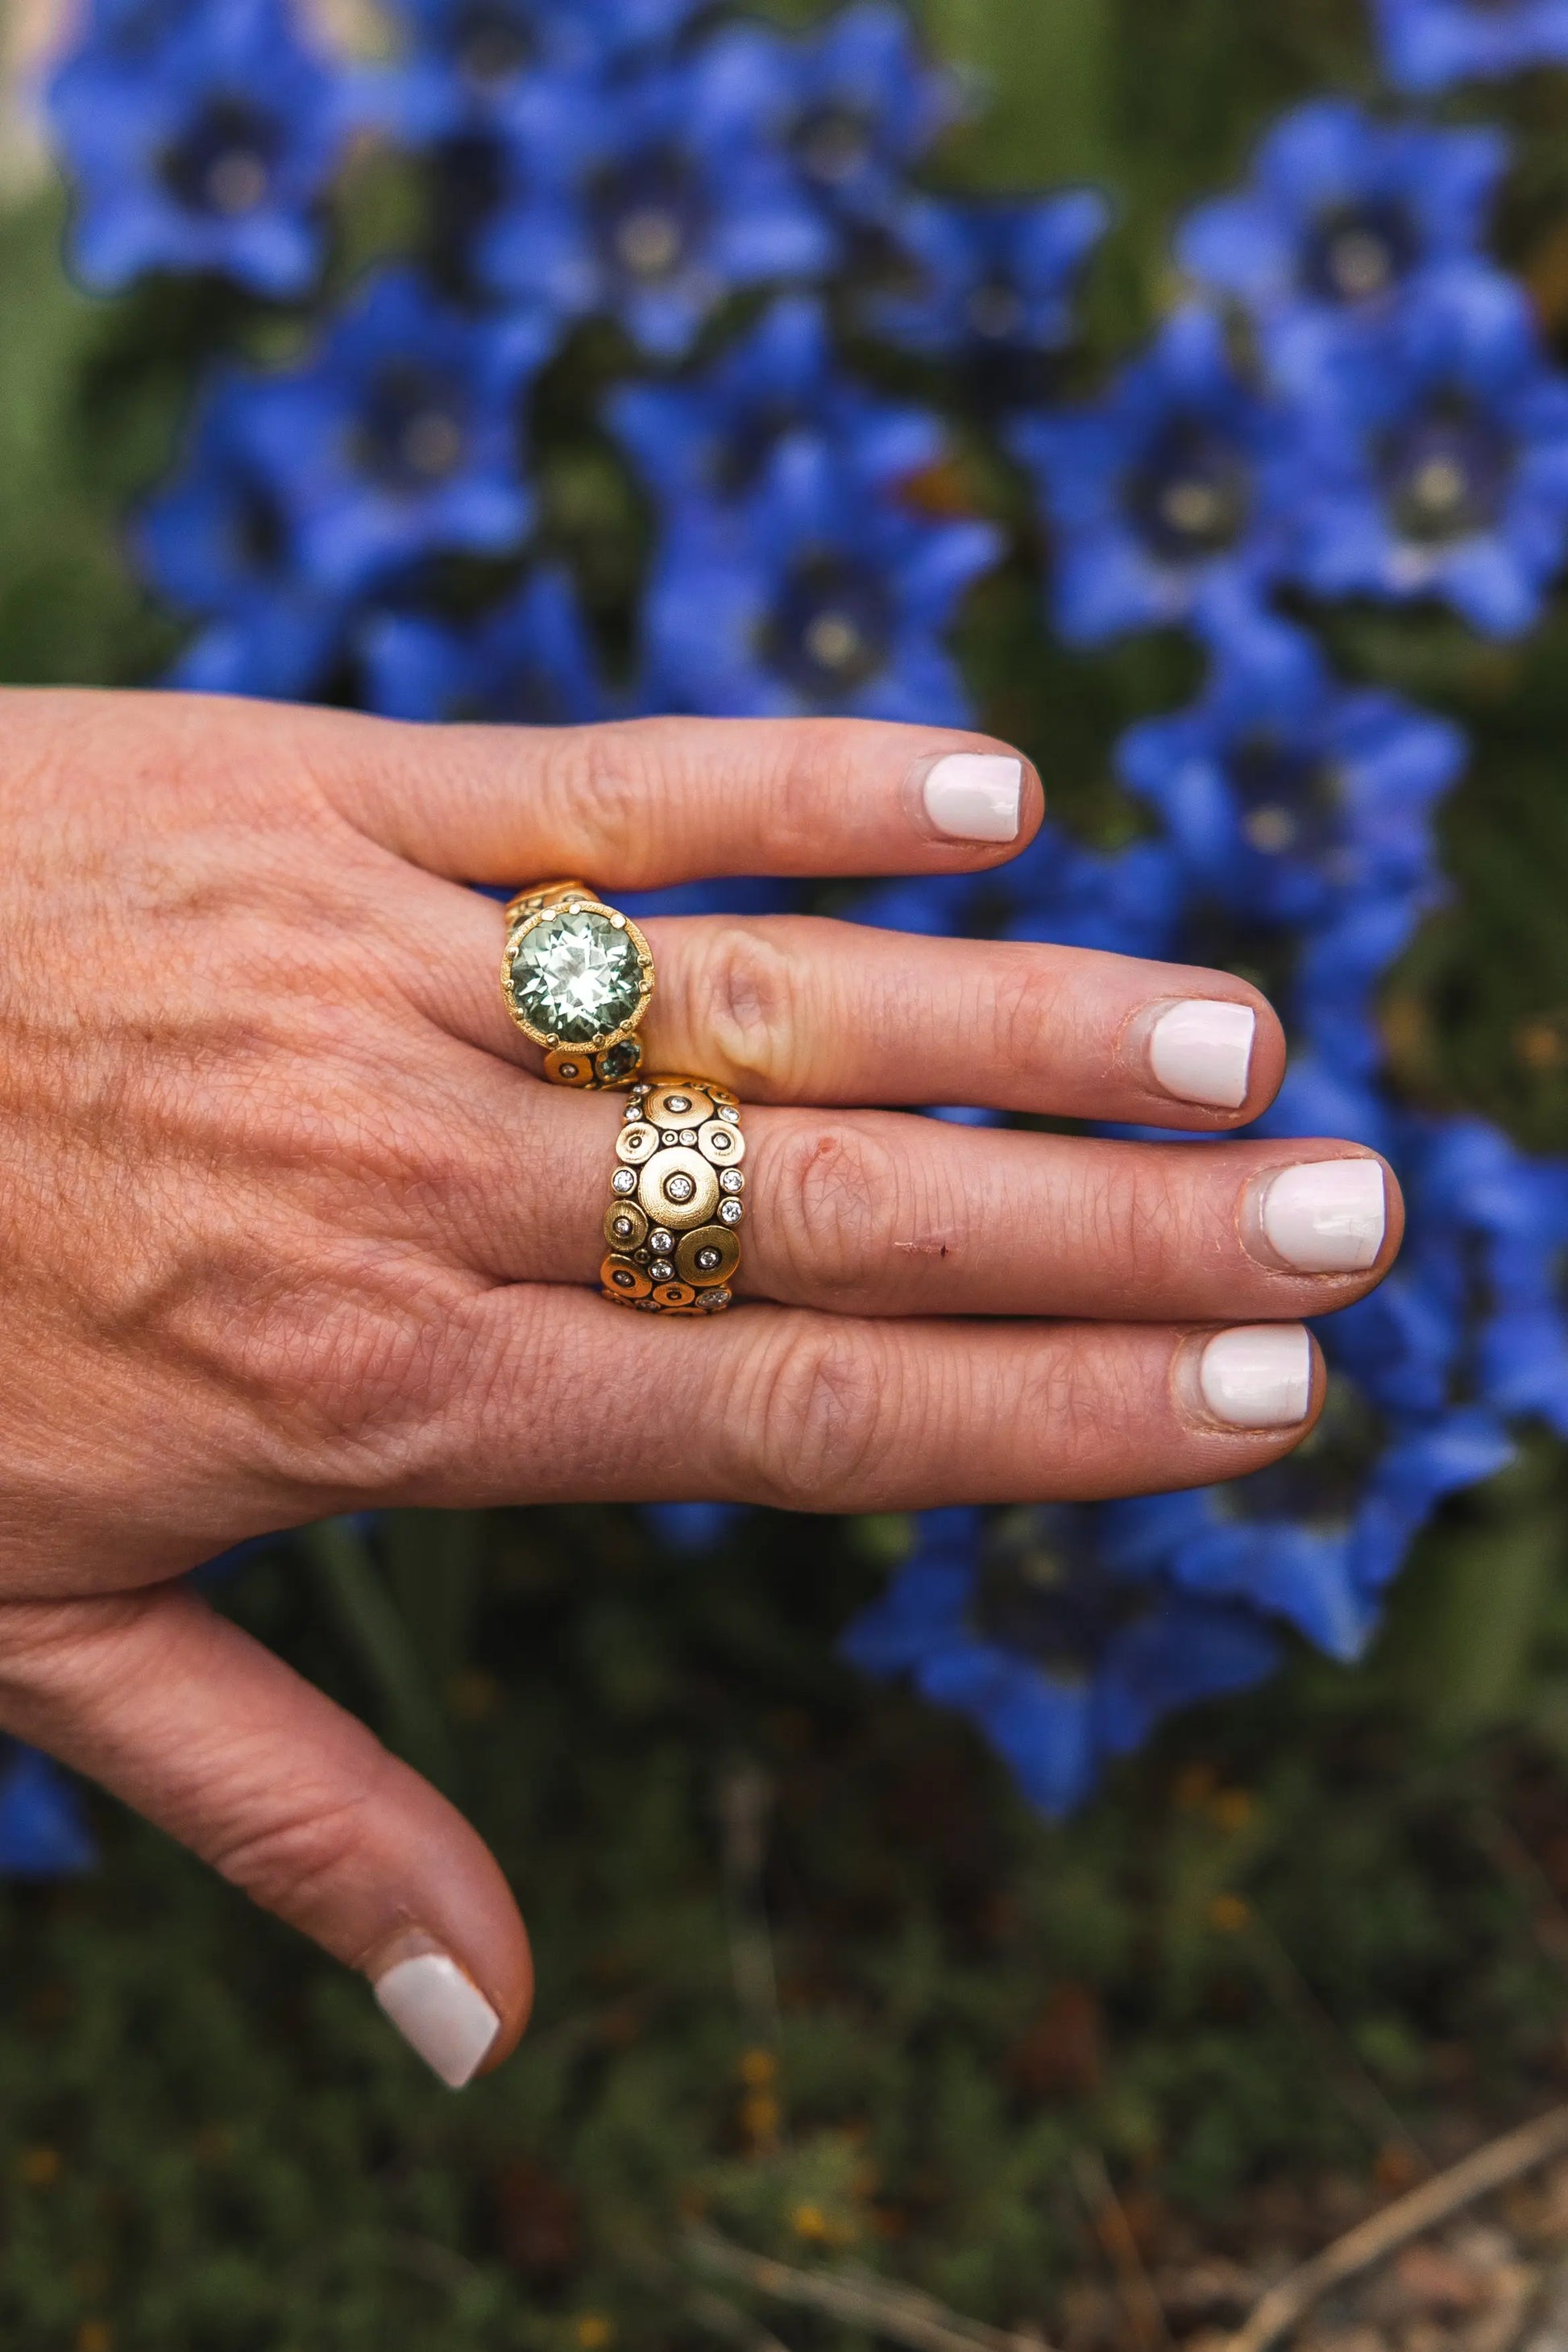 A couple of great stacking rings and center stone rings. 8k yellow gold and white diamond "Ocean" Ring  Details: White Diamonds .37ct Designed by Alex Sepkus